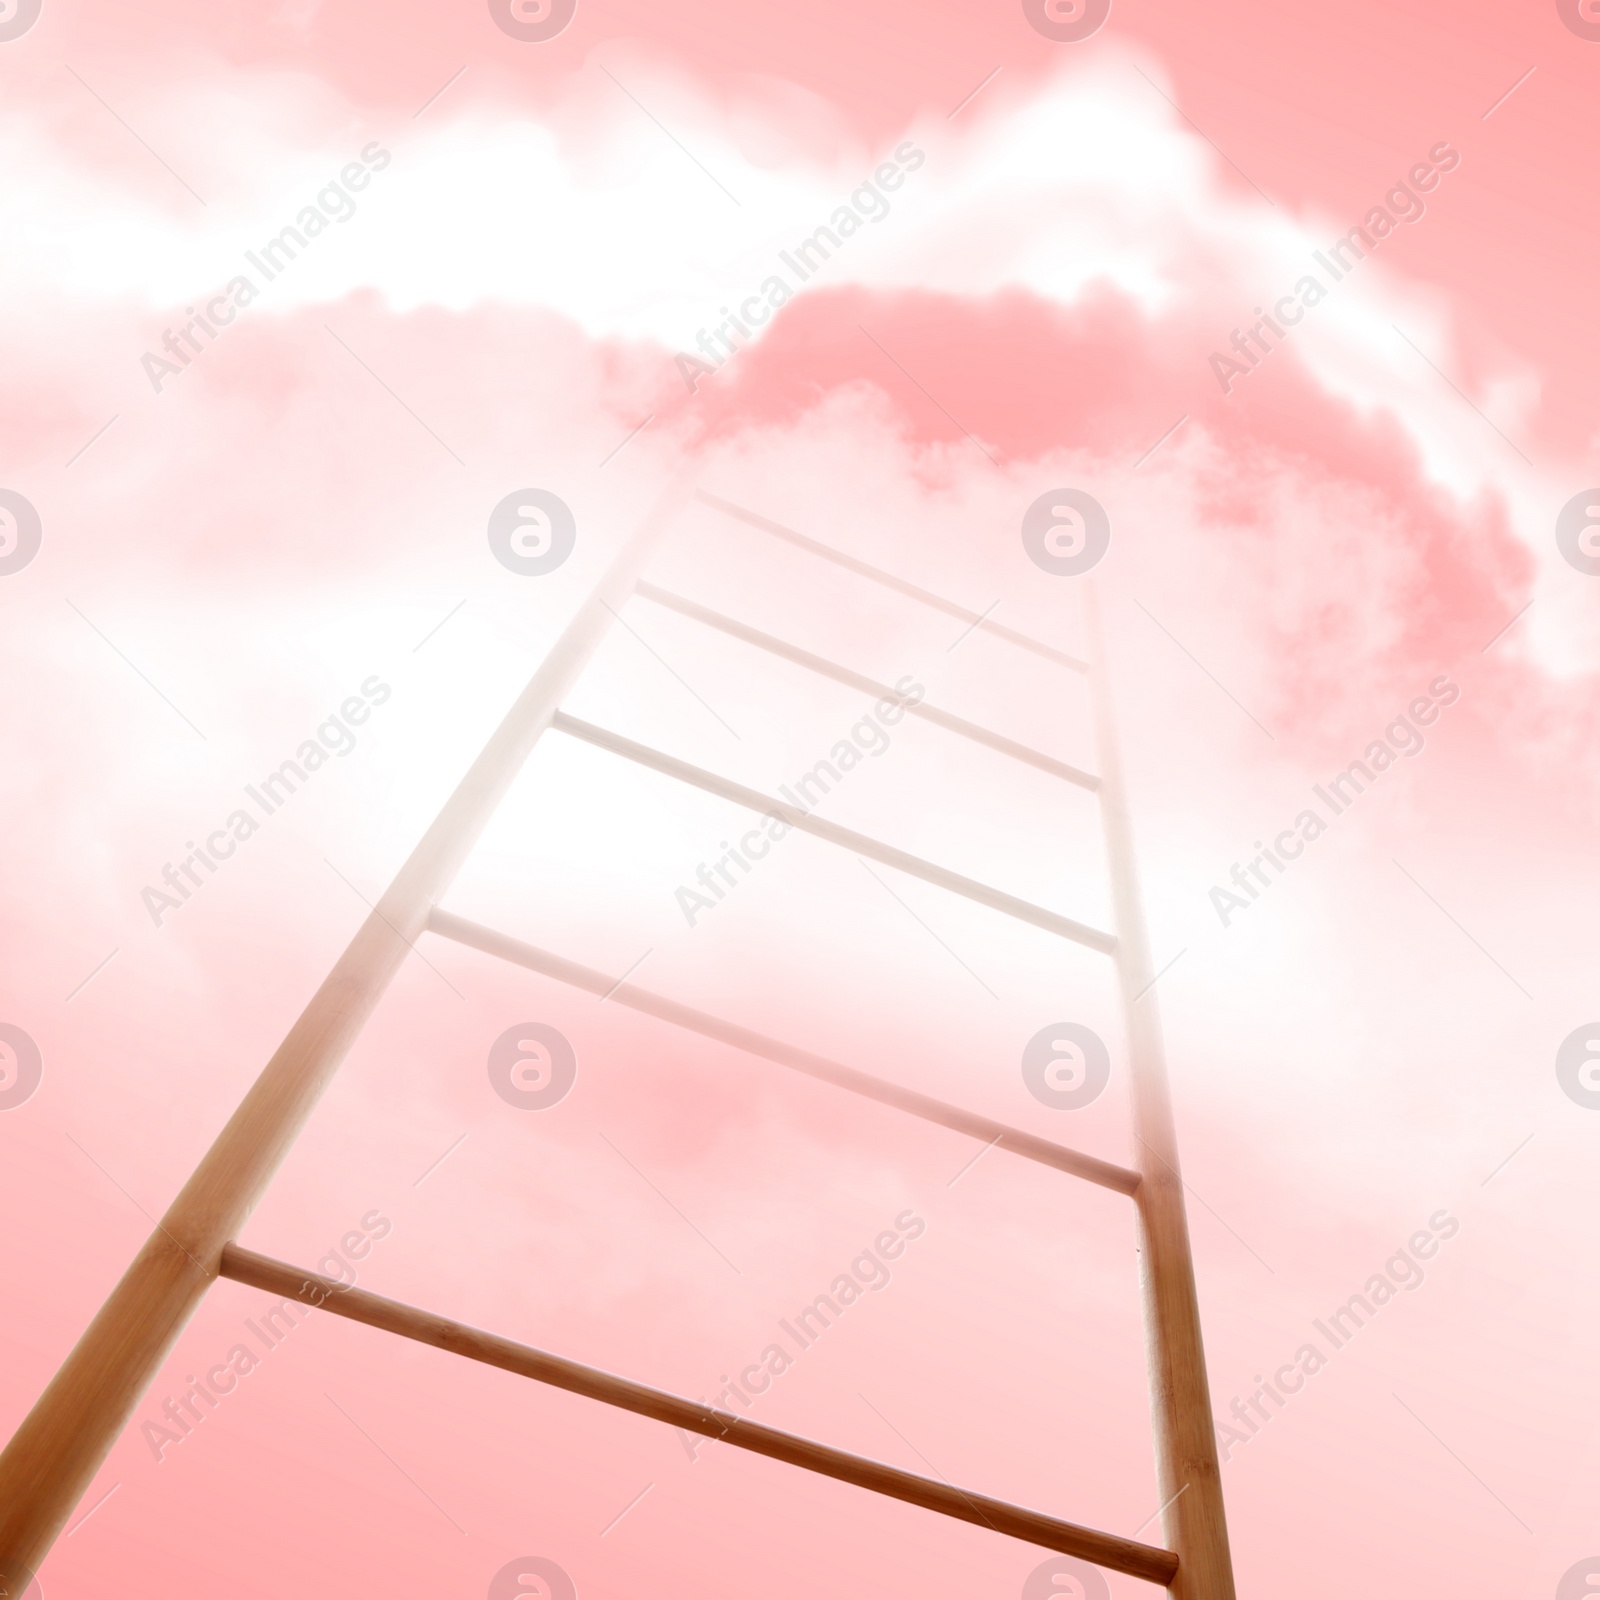 Image of Wooden ladder leading to clouds. Concept of growth and development